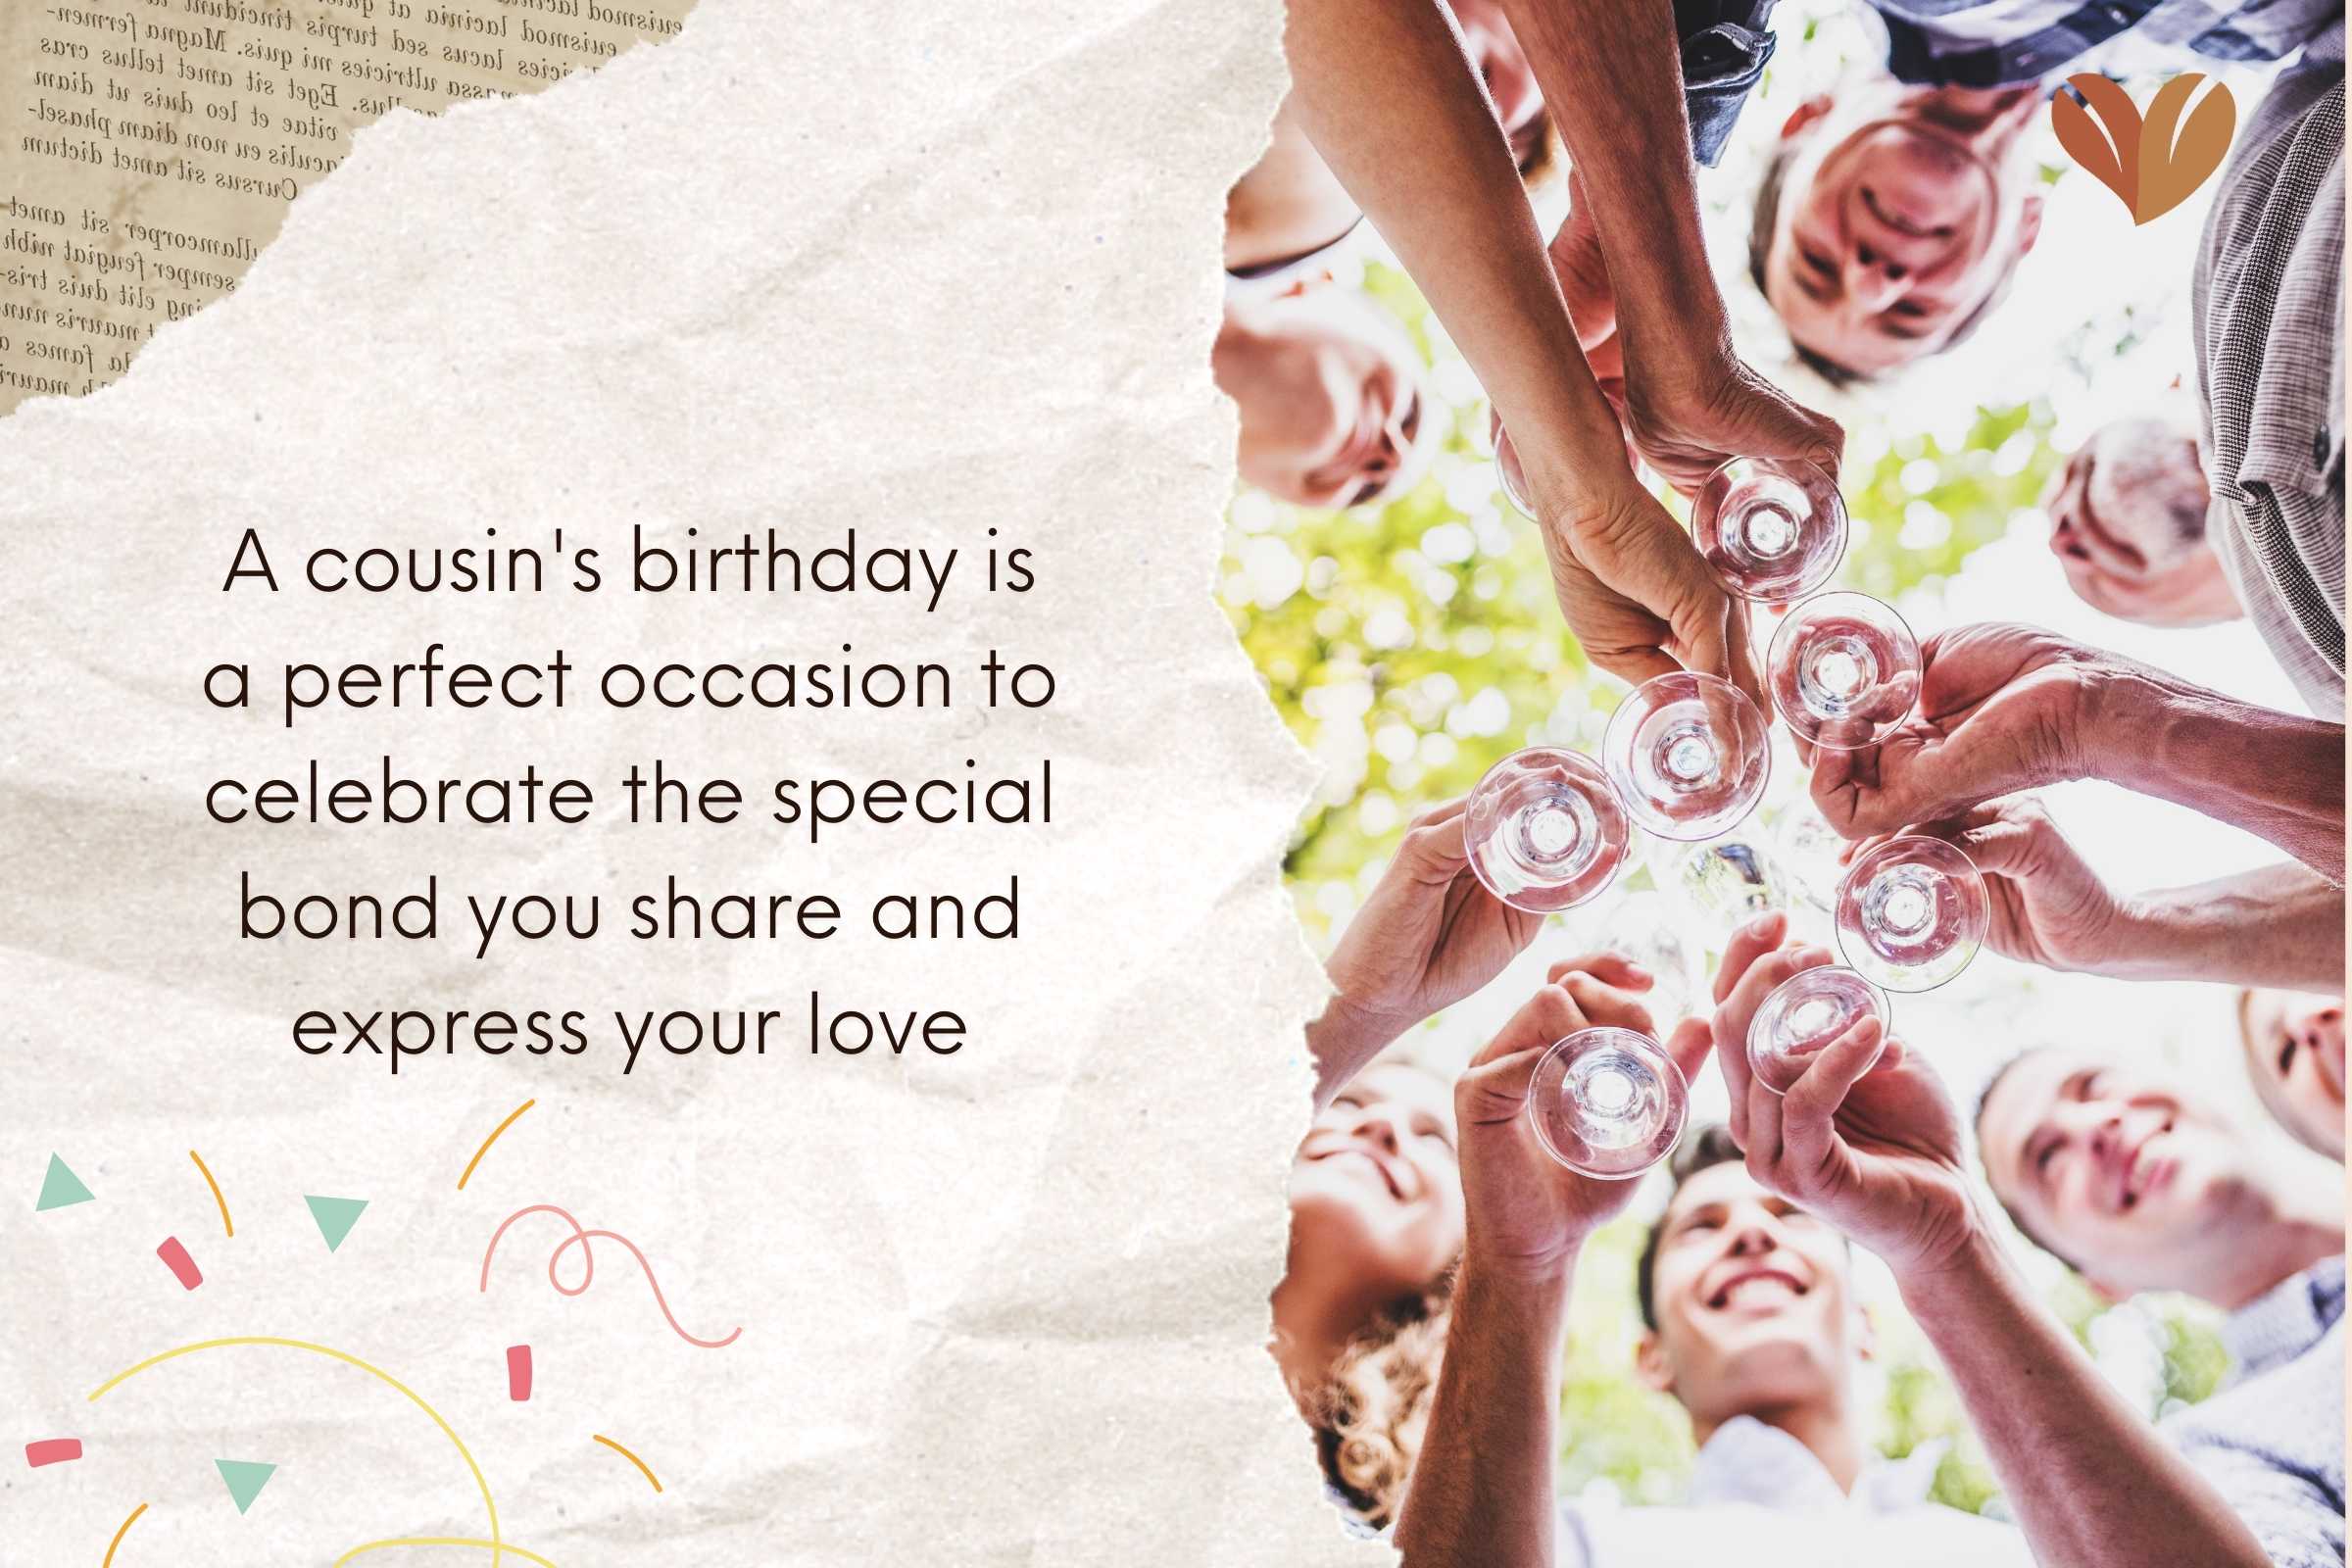 Family love in full bloom with heartfelt 'happy birthday cousin' wishes, a day of smiles.